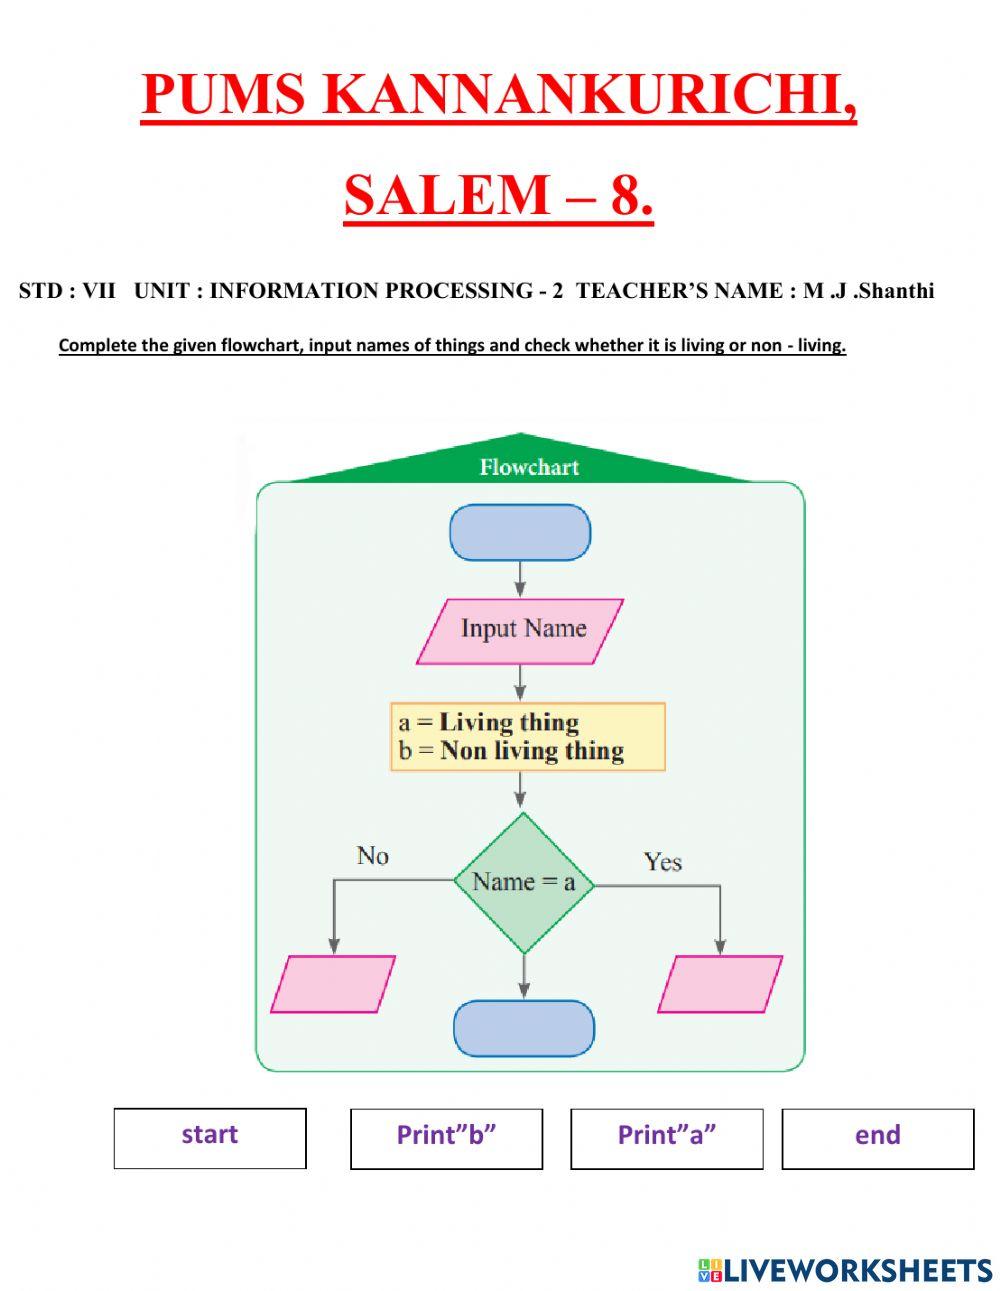 3-Information processing-2